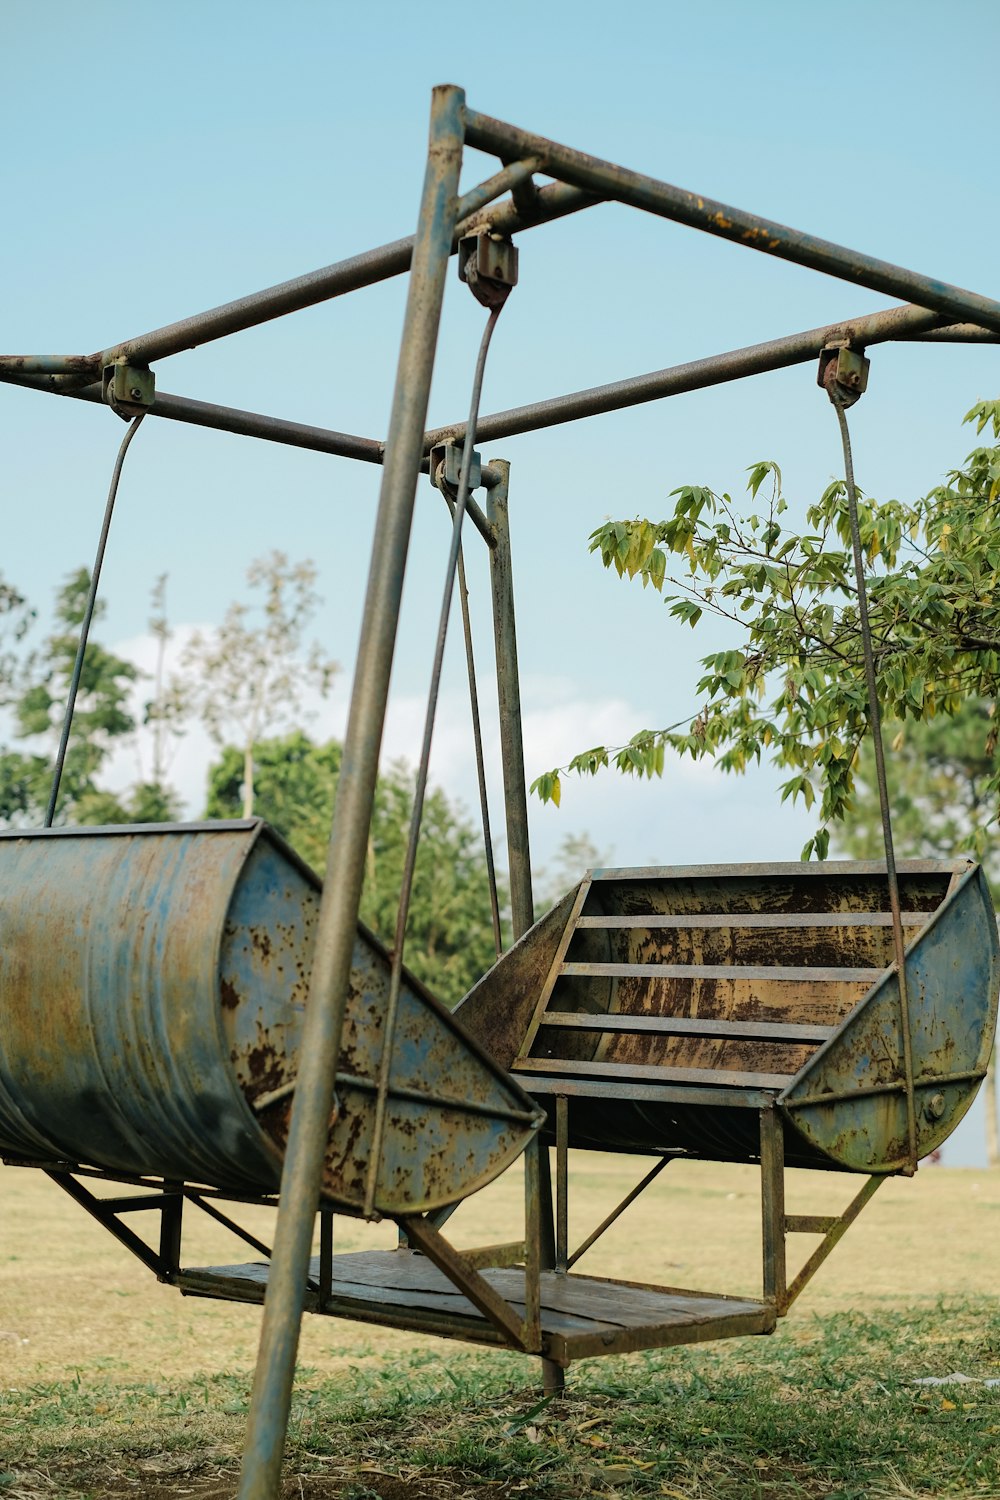 an old rusty metal swing with a tree in the background